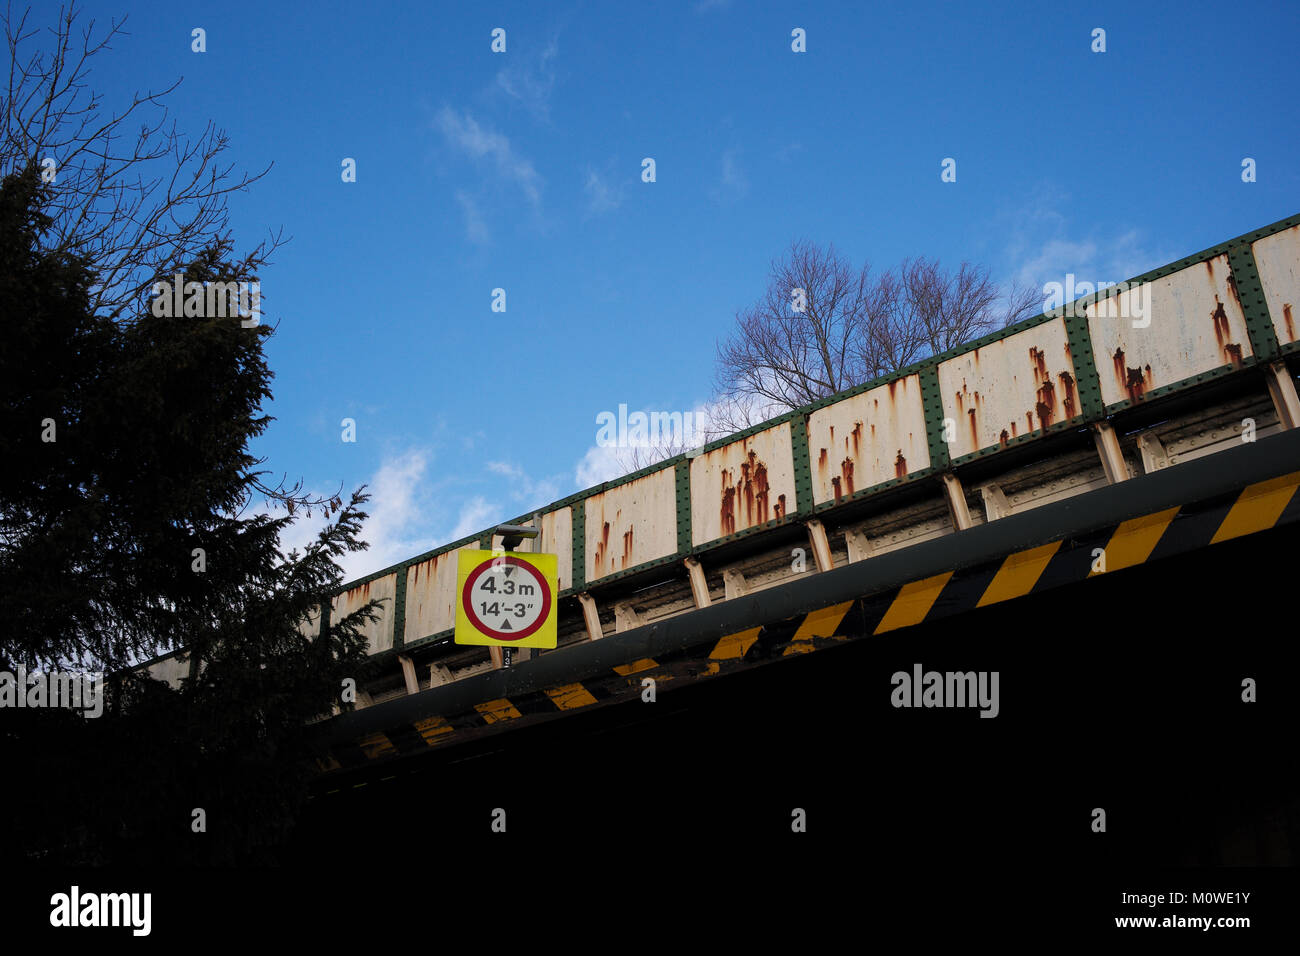 A close up of a rusty road crossing railway bridge with height warning signs against a blue sky. Stock Photo